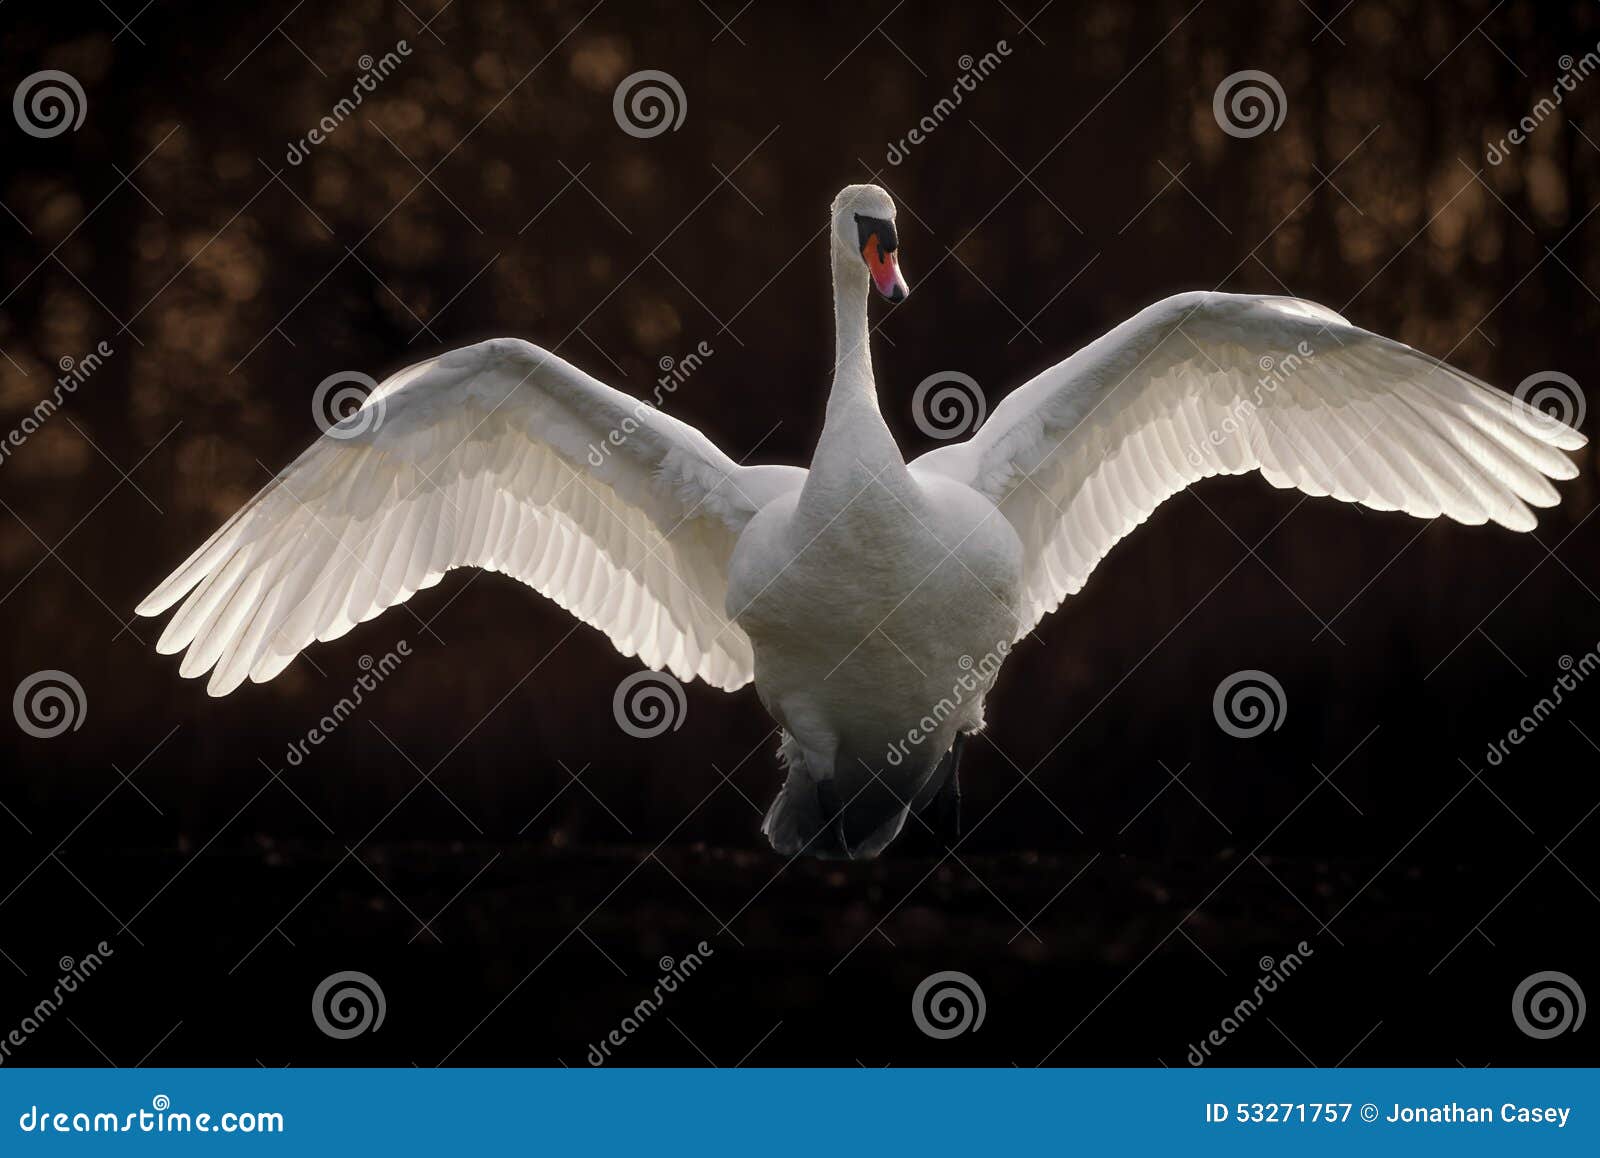 mute swan with wings spread